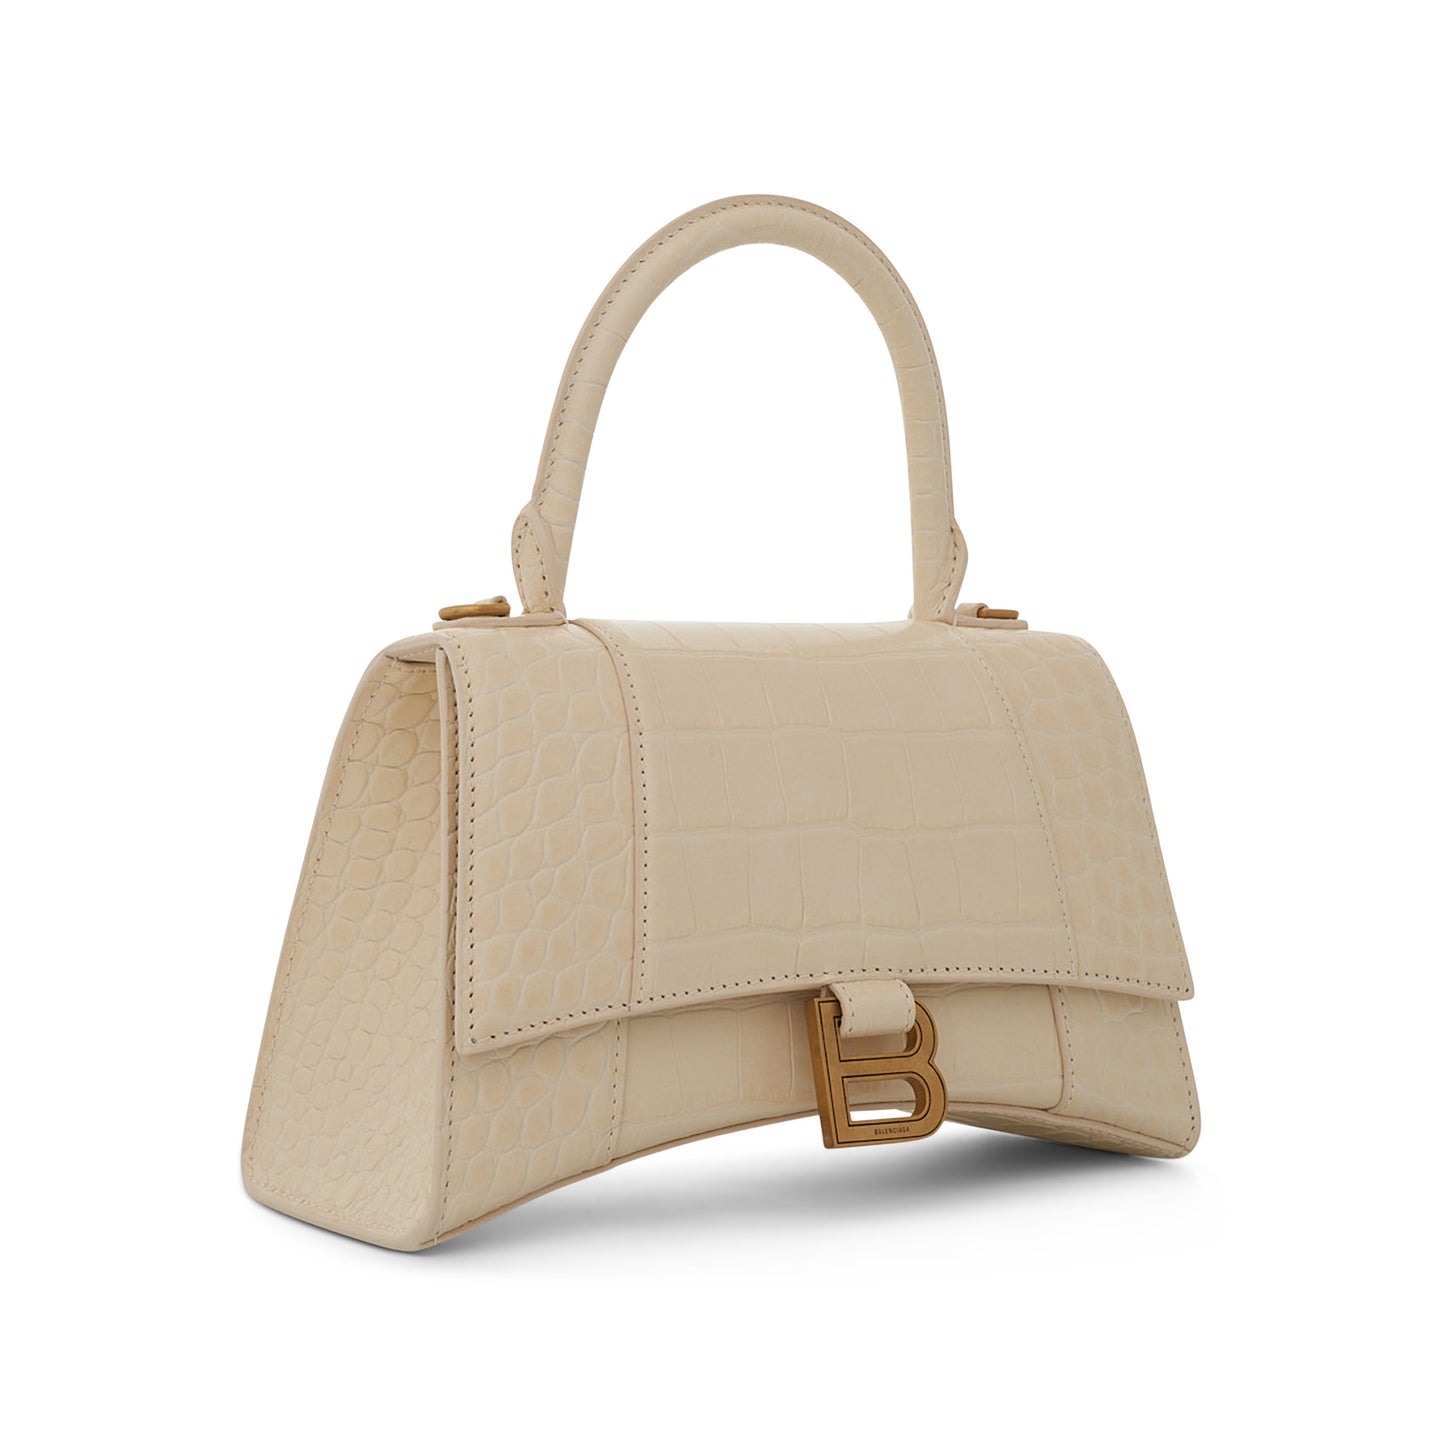 Hourglass Small Croco Embossed Bag in Yellow Beige